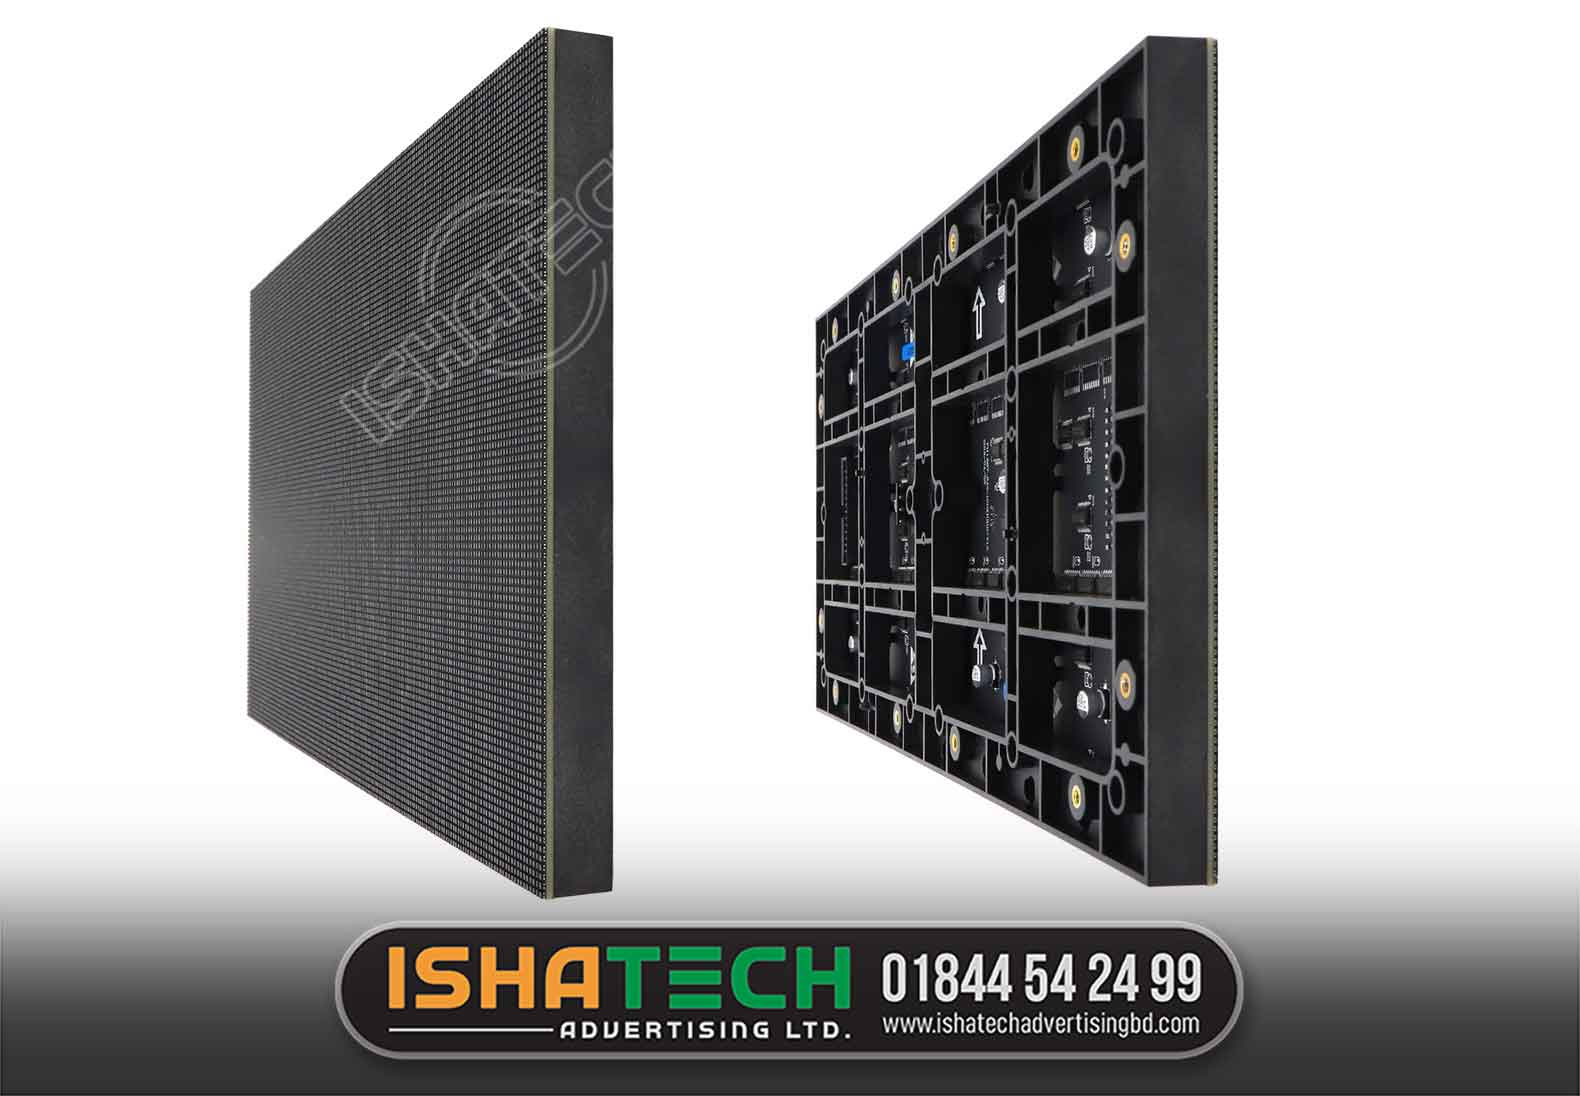 Indoor LED Display Module High Refresh rate indoor LED Screen Panel, High quality full color SMD indoor LED display module Including the Data Power Cables and 2 Years Warranty, All LED modules With Best Contrast and Color uniformity to ensure the LED display has excellent visual effect.